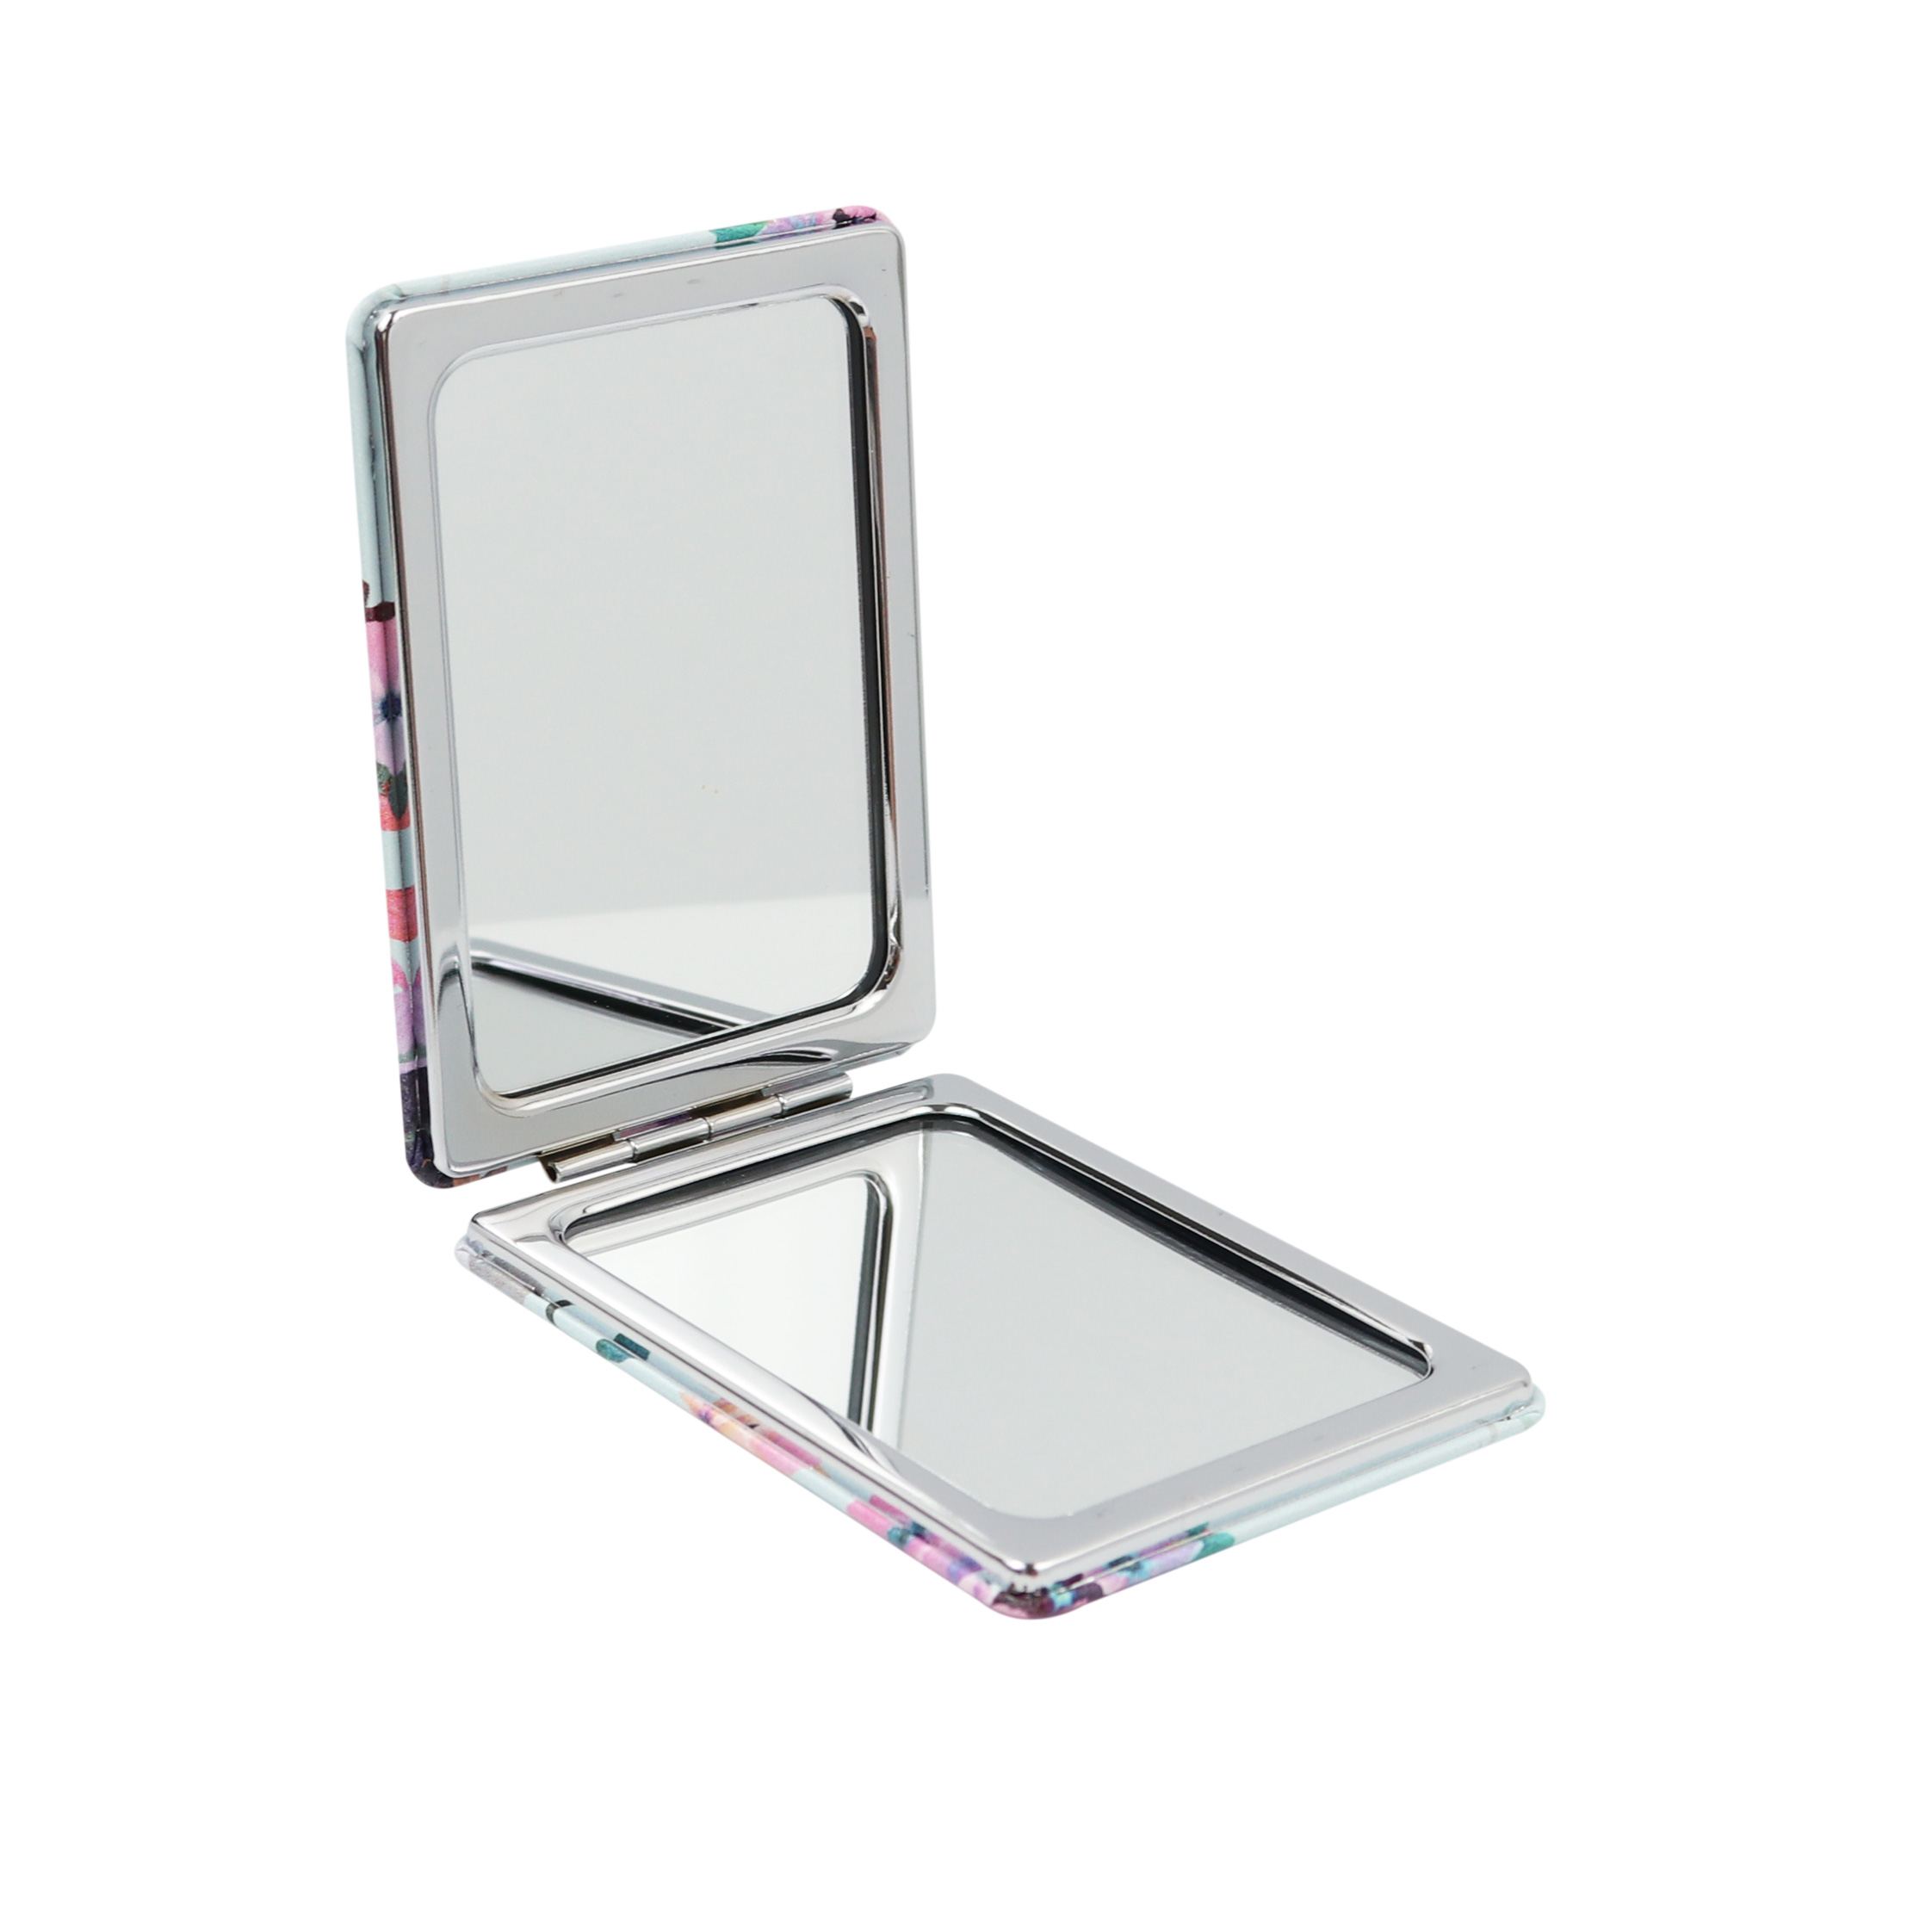 Enchant rectangle compact mirror - Wicked Sista | Cosmetic Bags ...